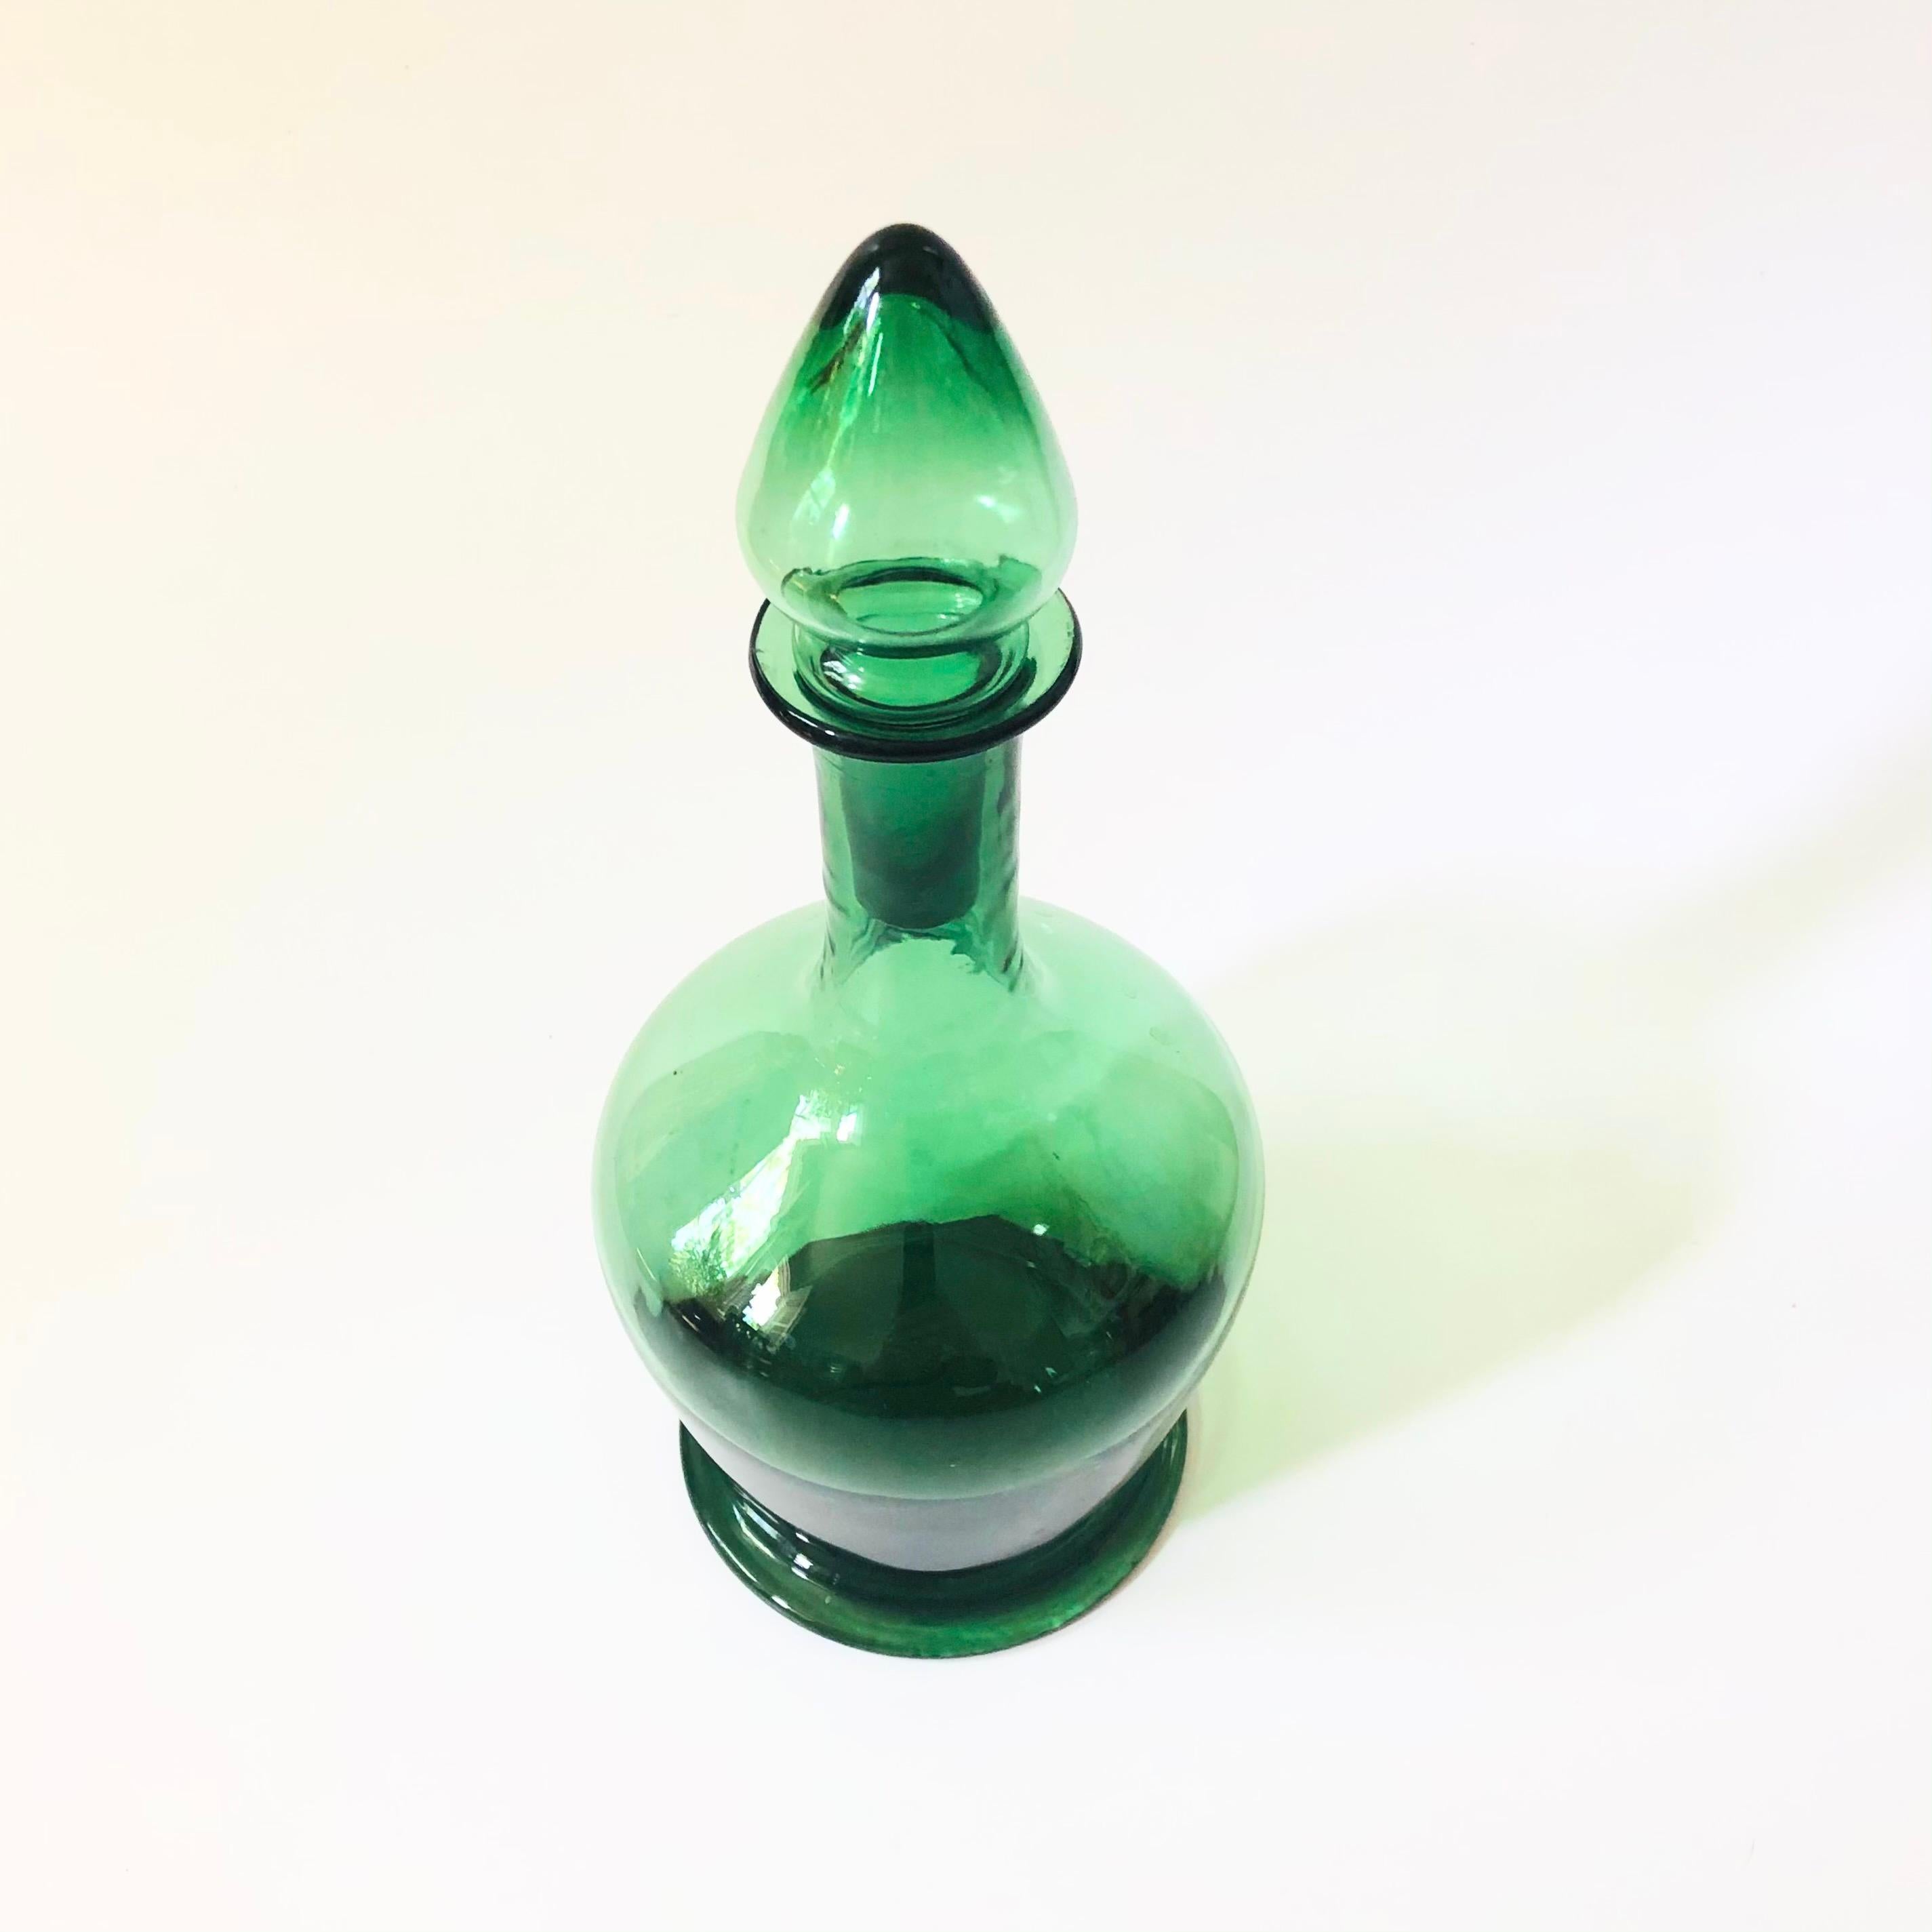 A vintage glass decanter. Beautiful green color to the glass.

